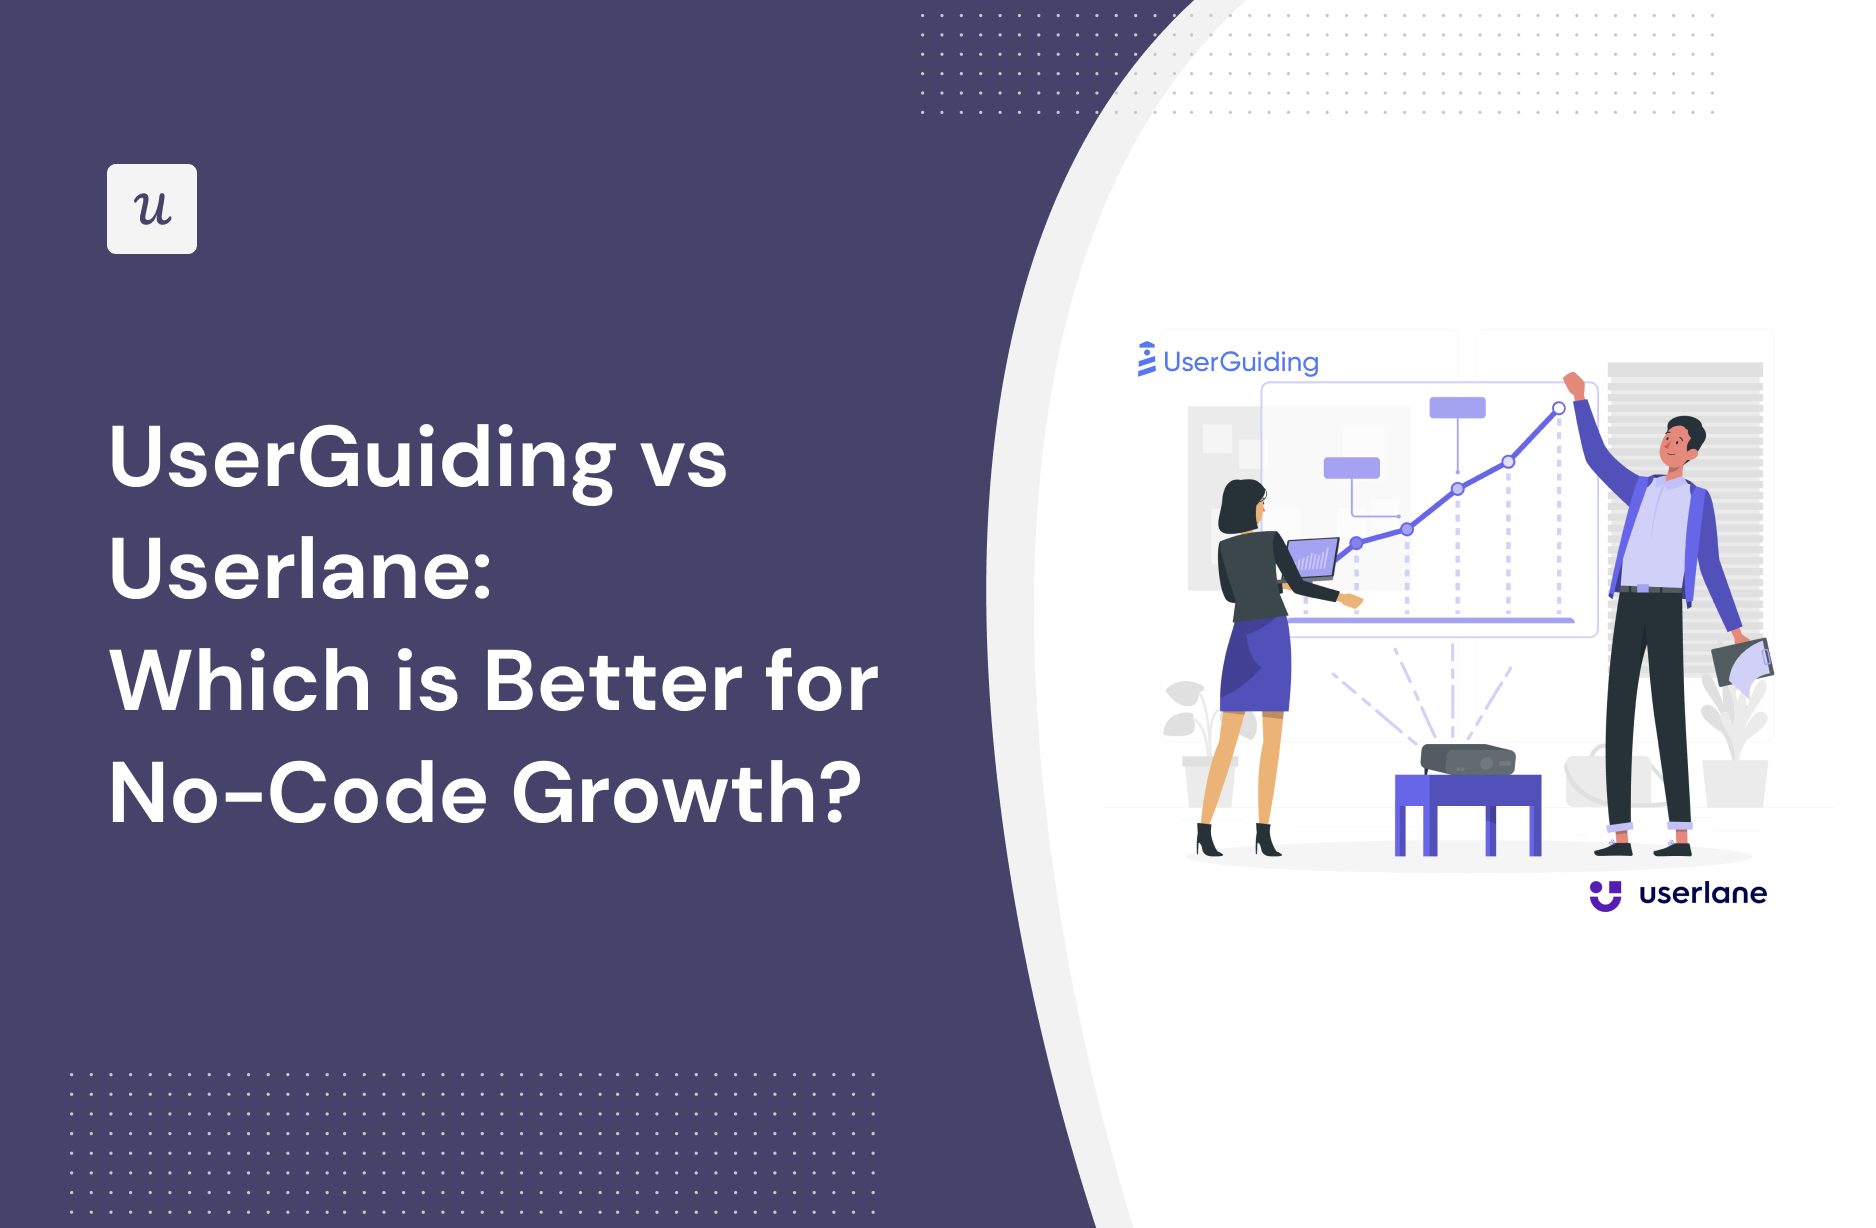 UserGuiding vs Userlane: Which is Better for No-Code Growth?